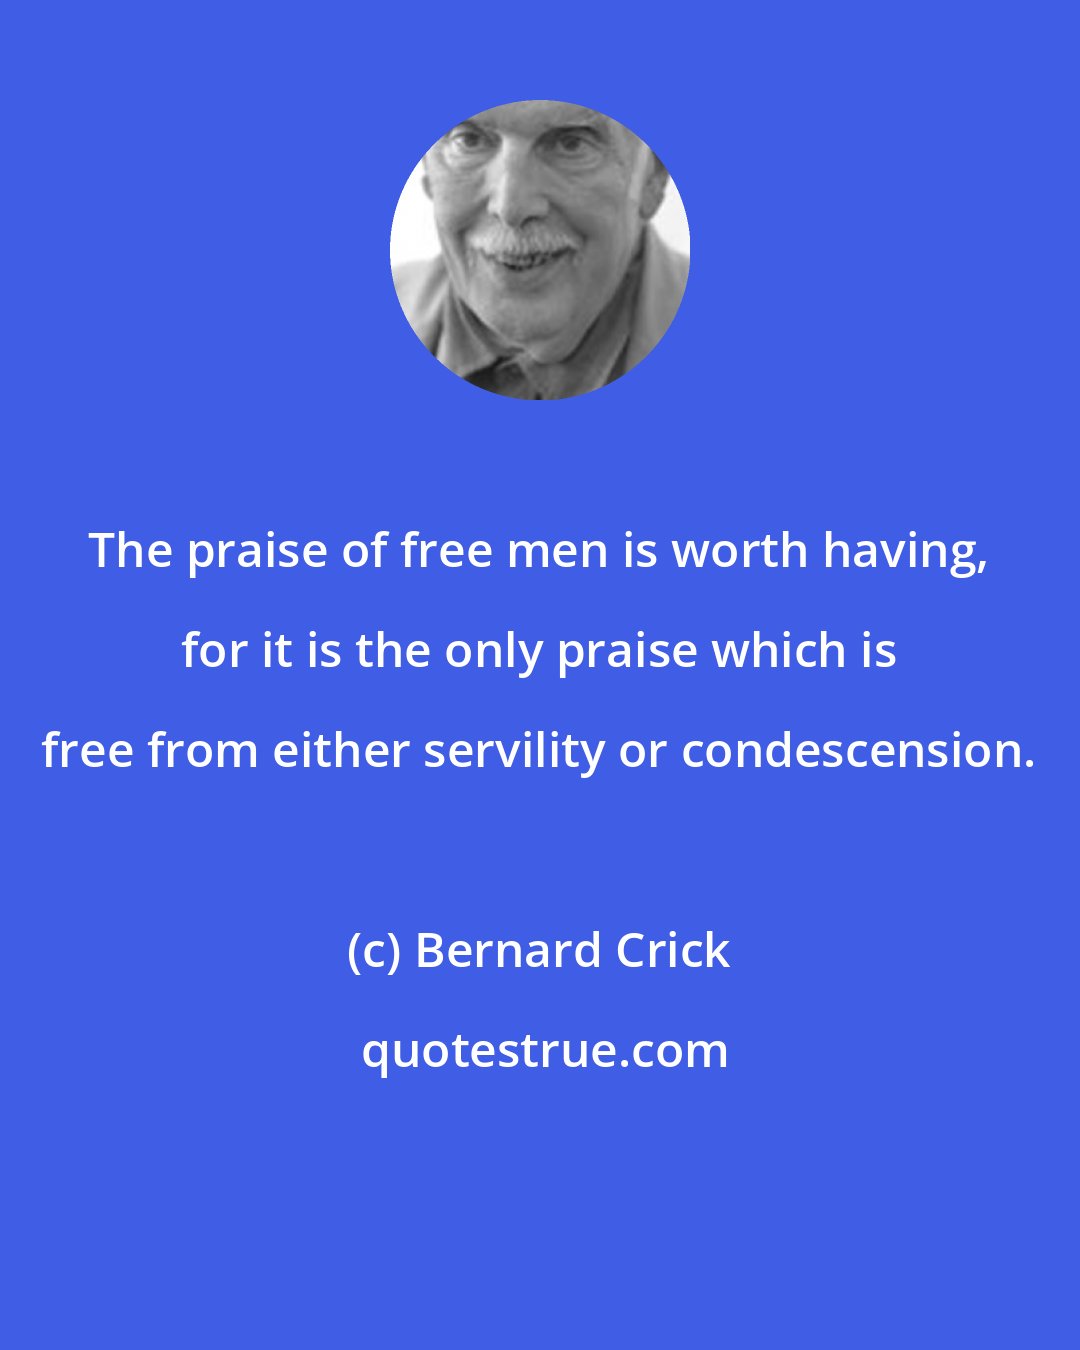 Bernard Crick: The praise of free men is worth having, for it is the only praise which is free from either servility or condescension.